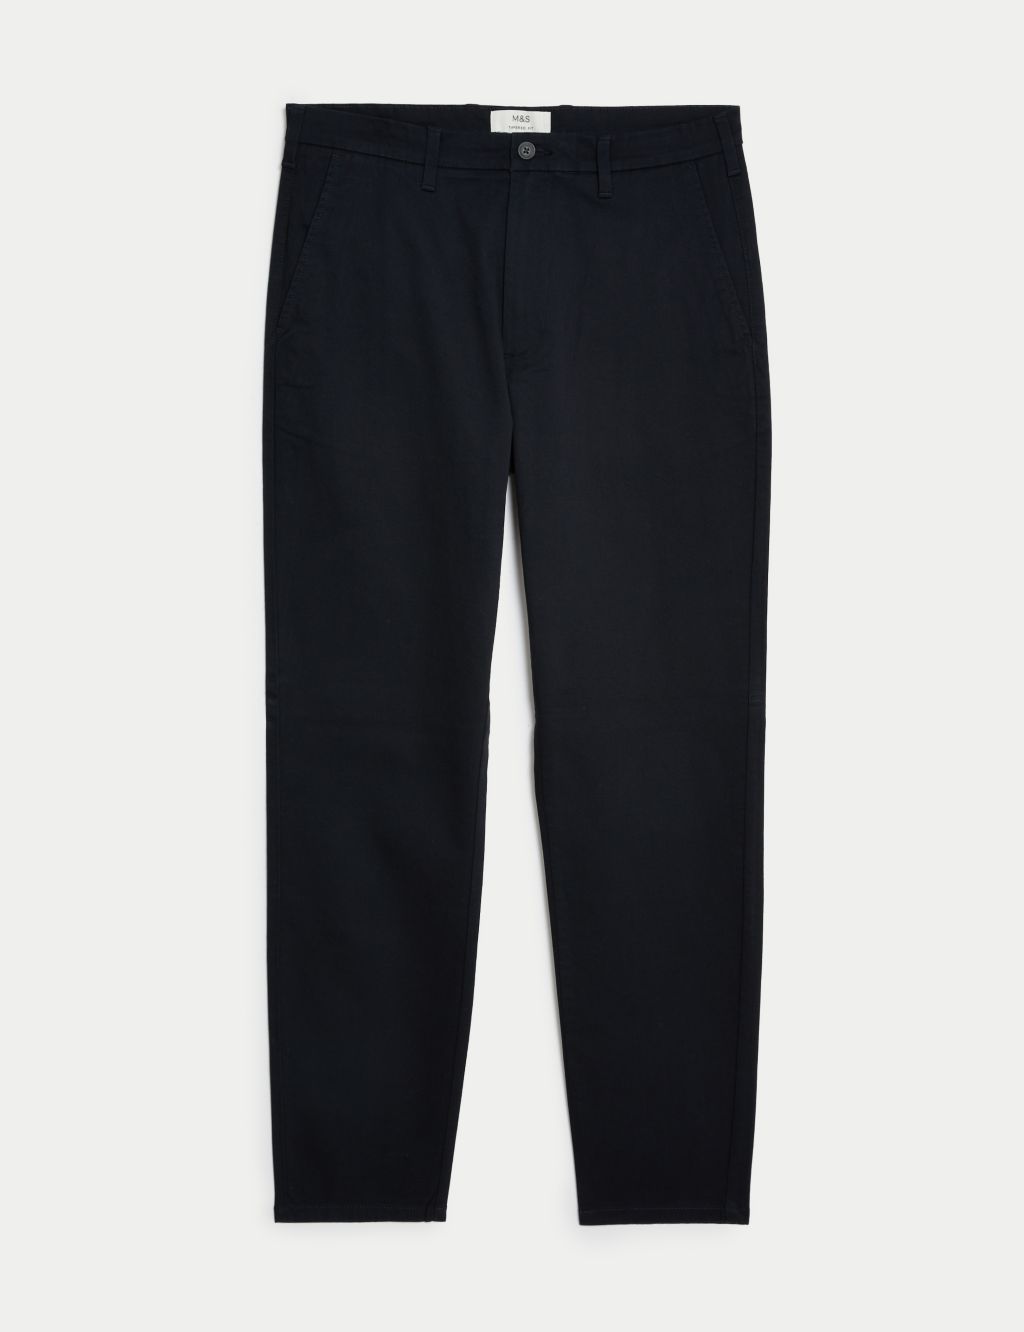 Tapered Fit Stretch Chinos image 1